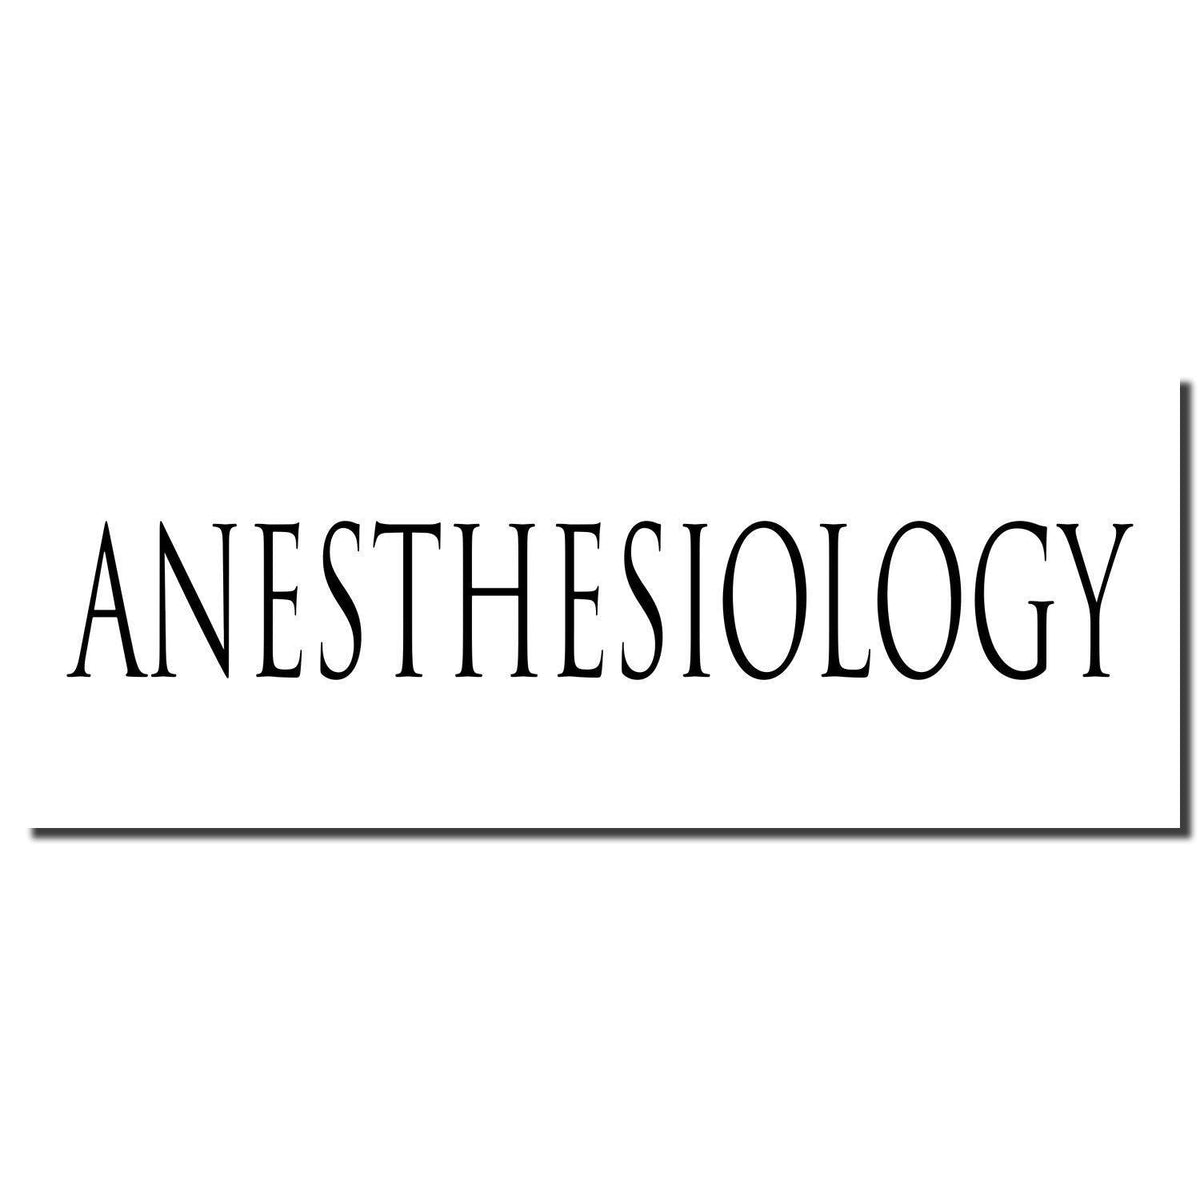 Enlarged Imprint Anesthesiology Rubber Stamp Sample